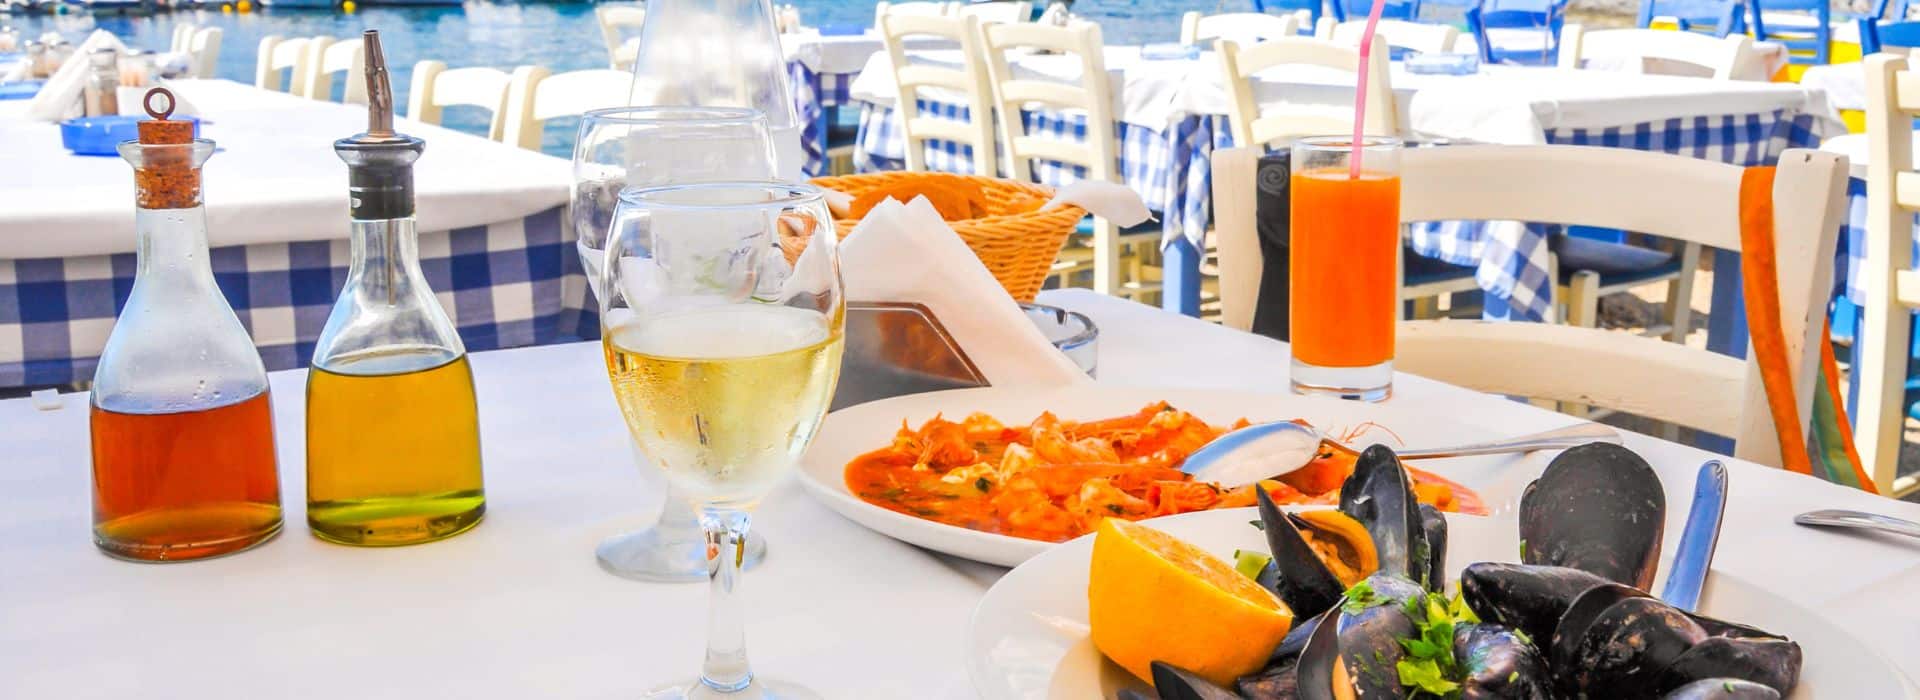 Plates of seafood with wine served by the water